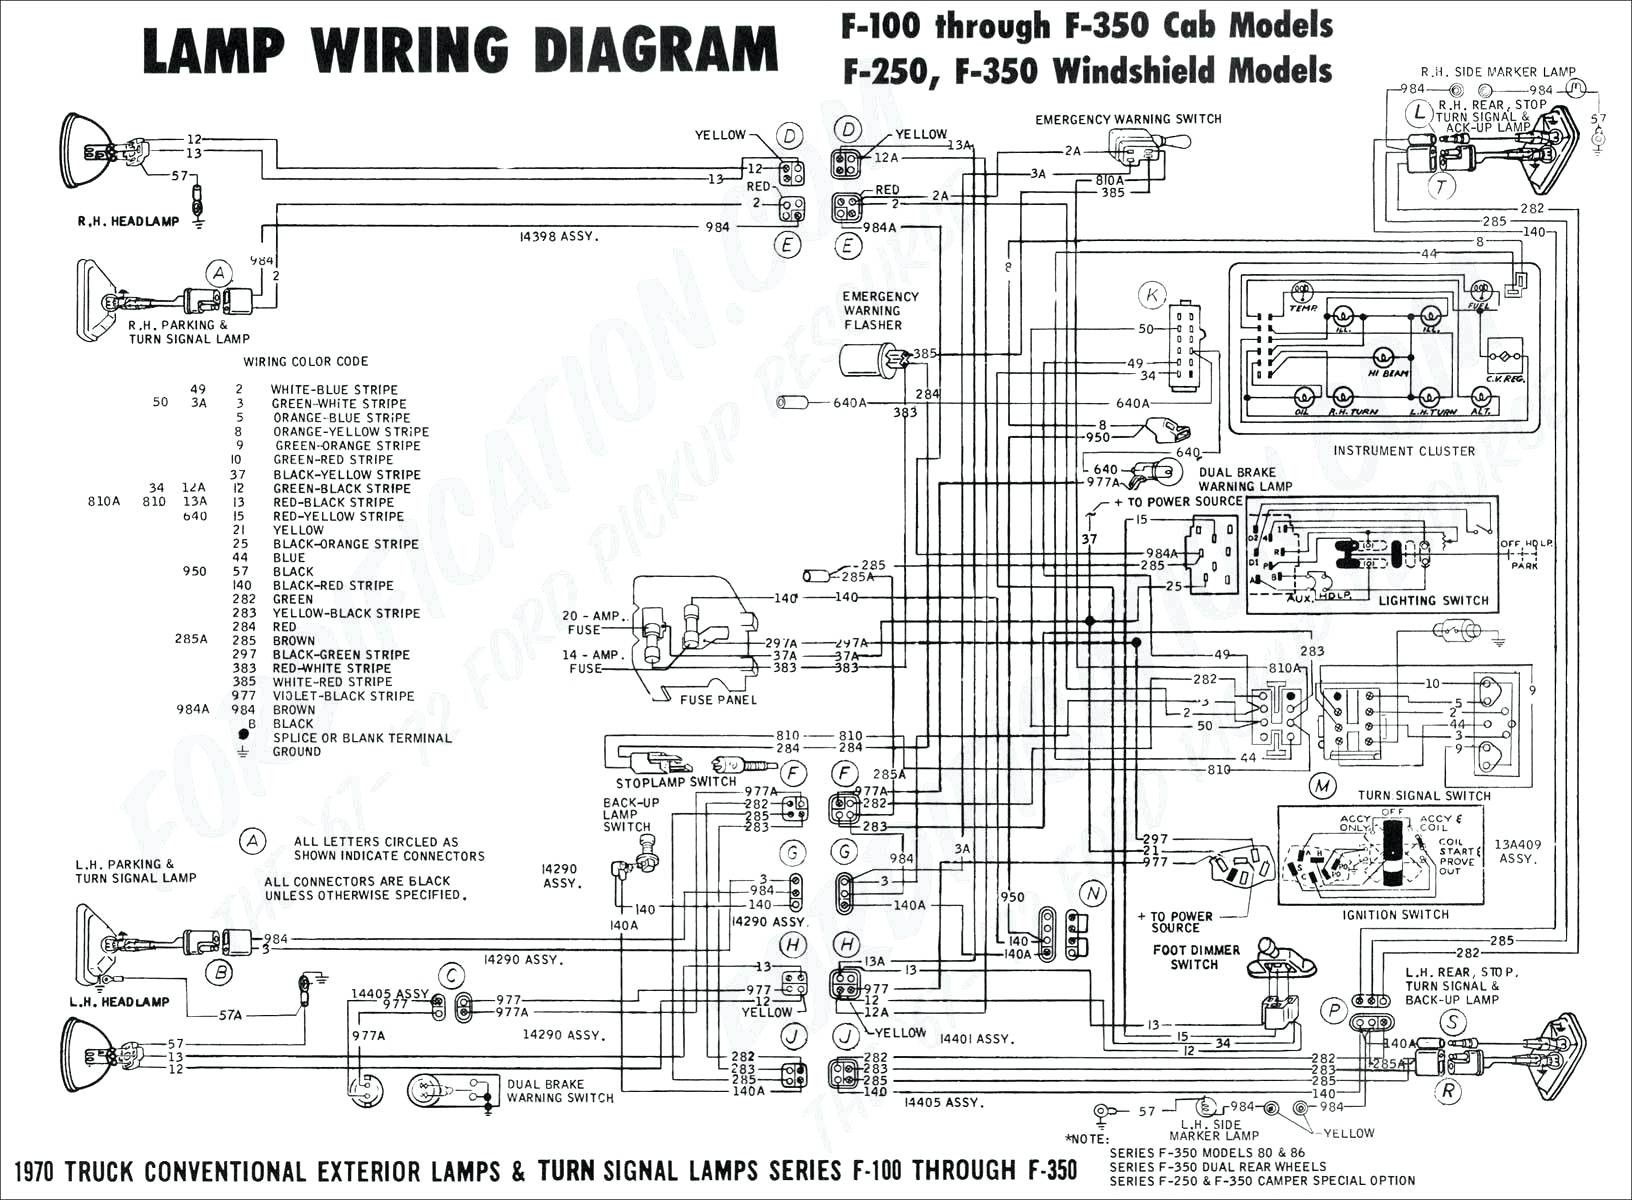 Wiring Diagram For Kia Spectra Power Window from mainetreasurechest.com